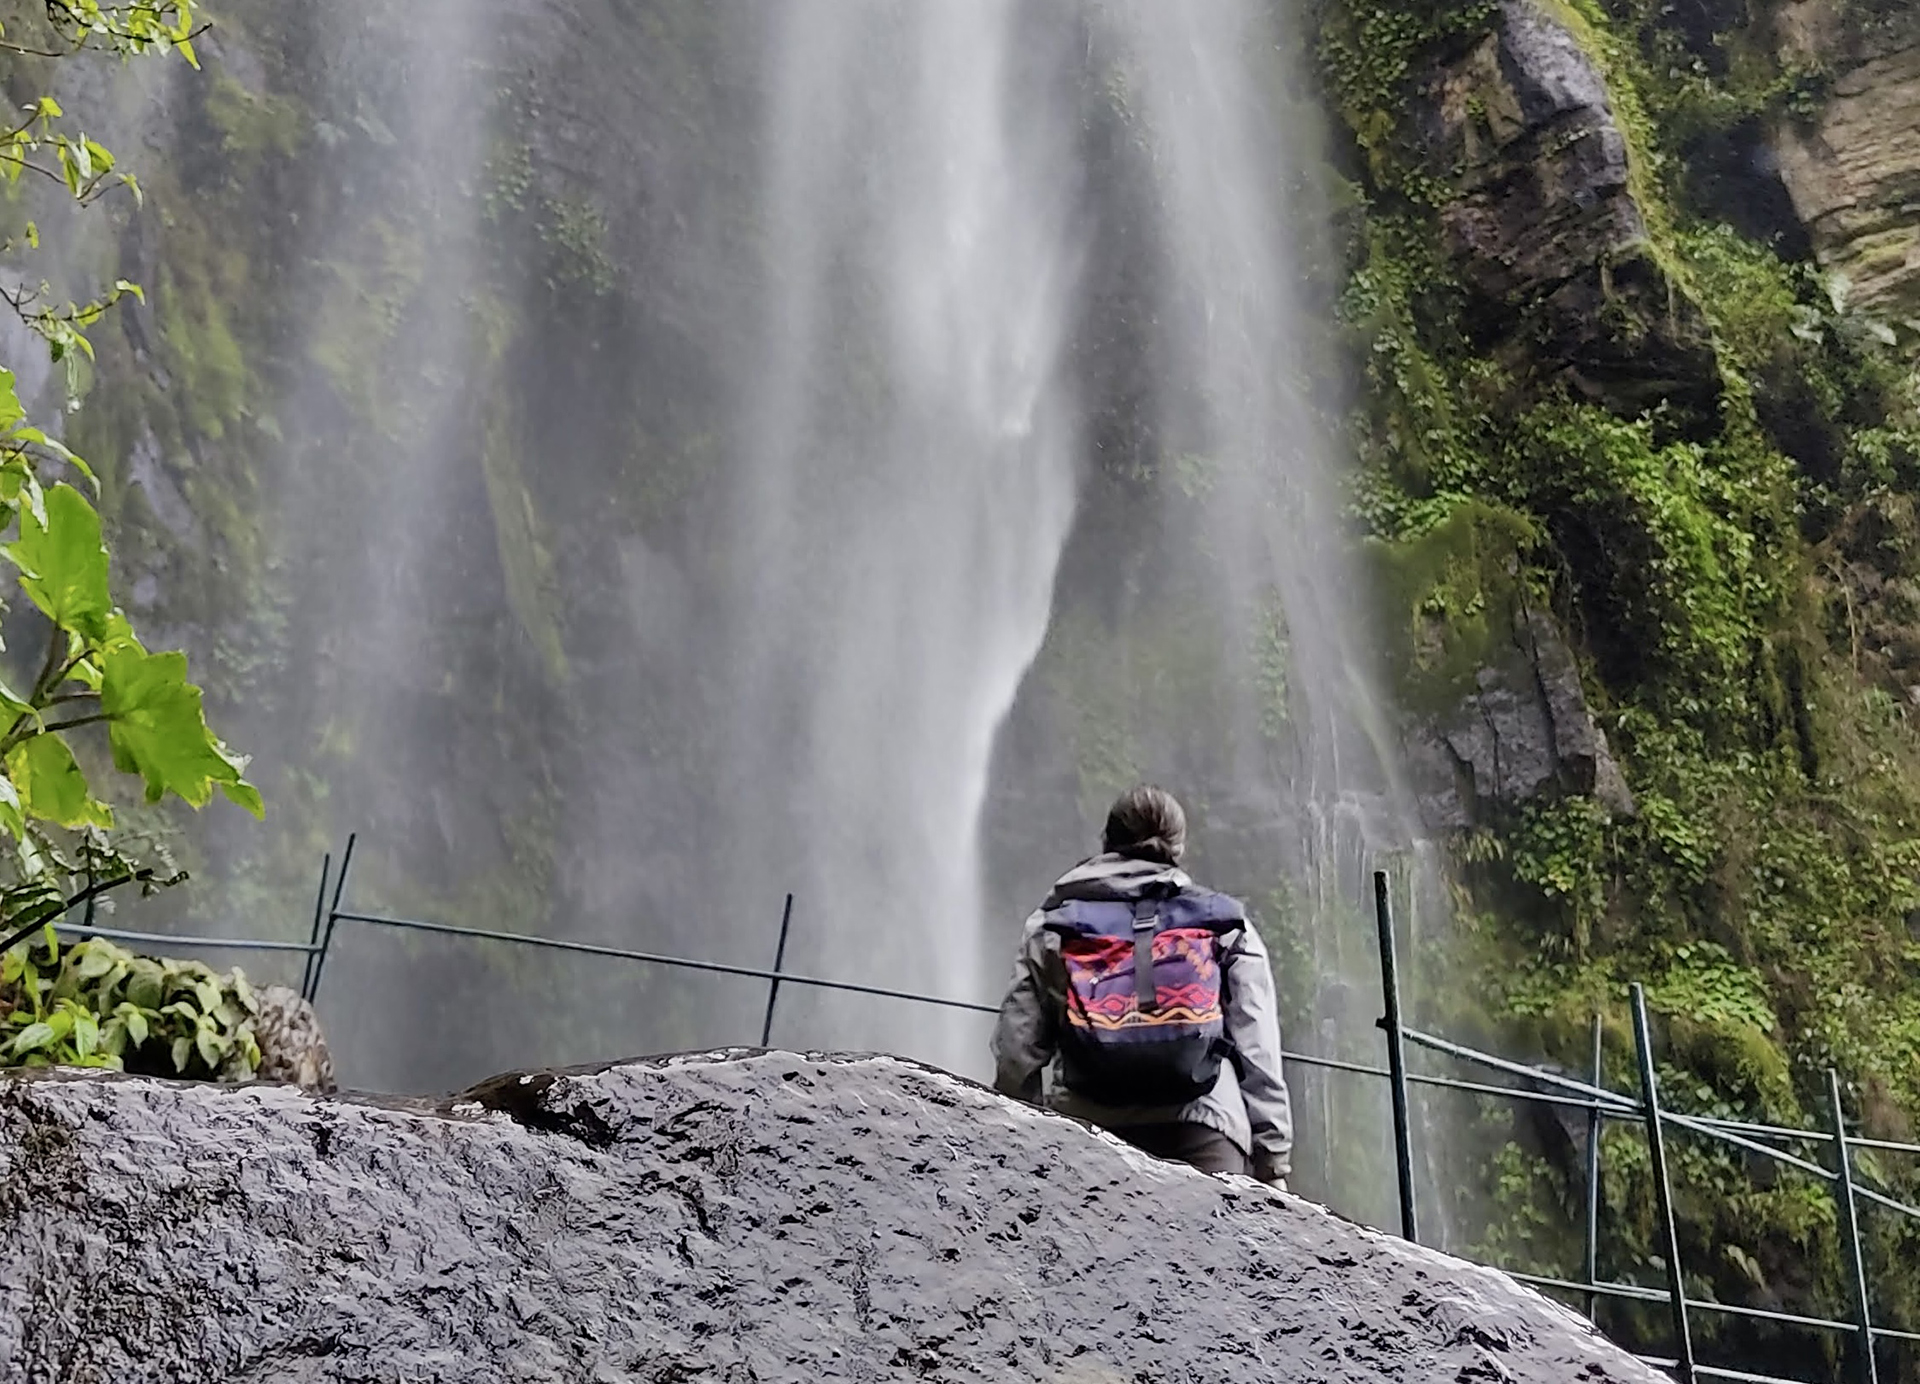 Individual with a colorful backpack stands on a rock near a tall waterfall, which cascades down a moss-covered cliff. A fence is visible next to them. This serene moment could easily be part of the many breathtaking sights offered by Bogotá city tours.